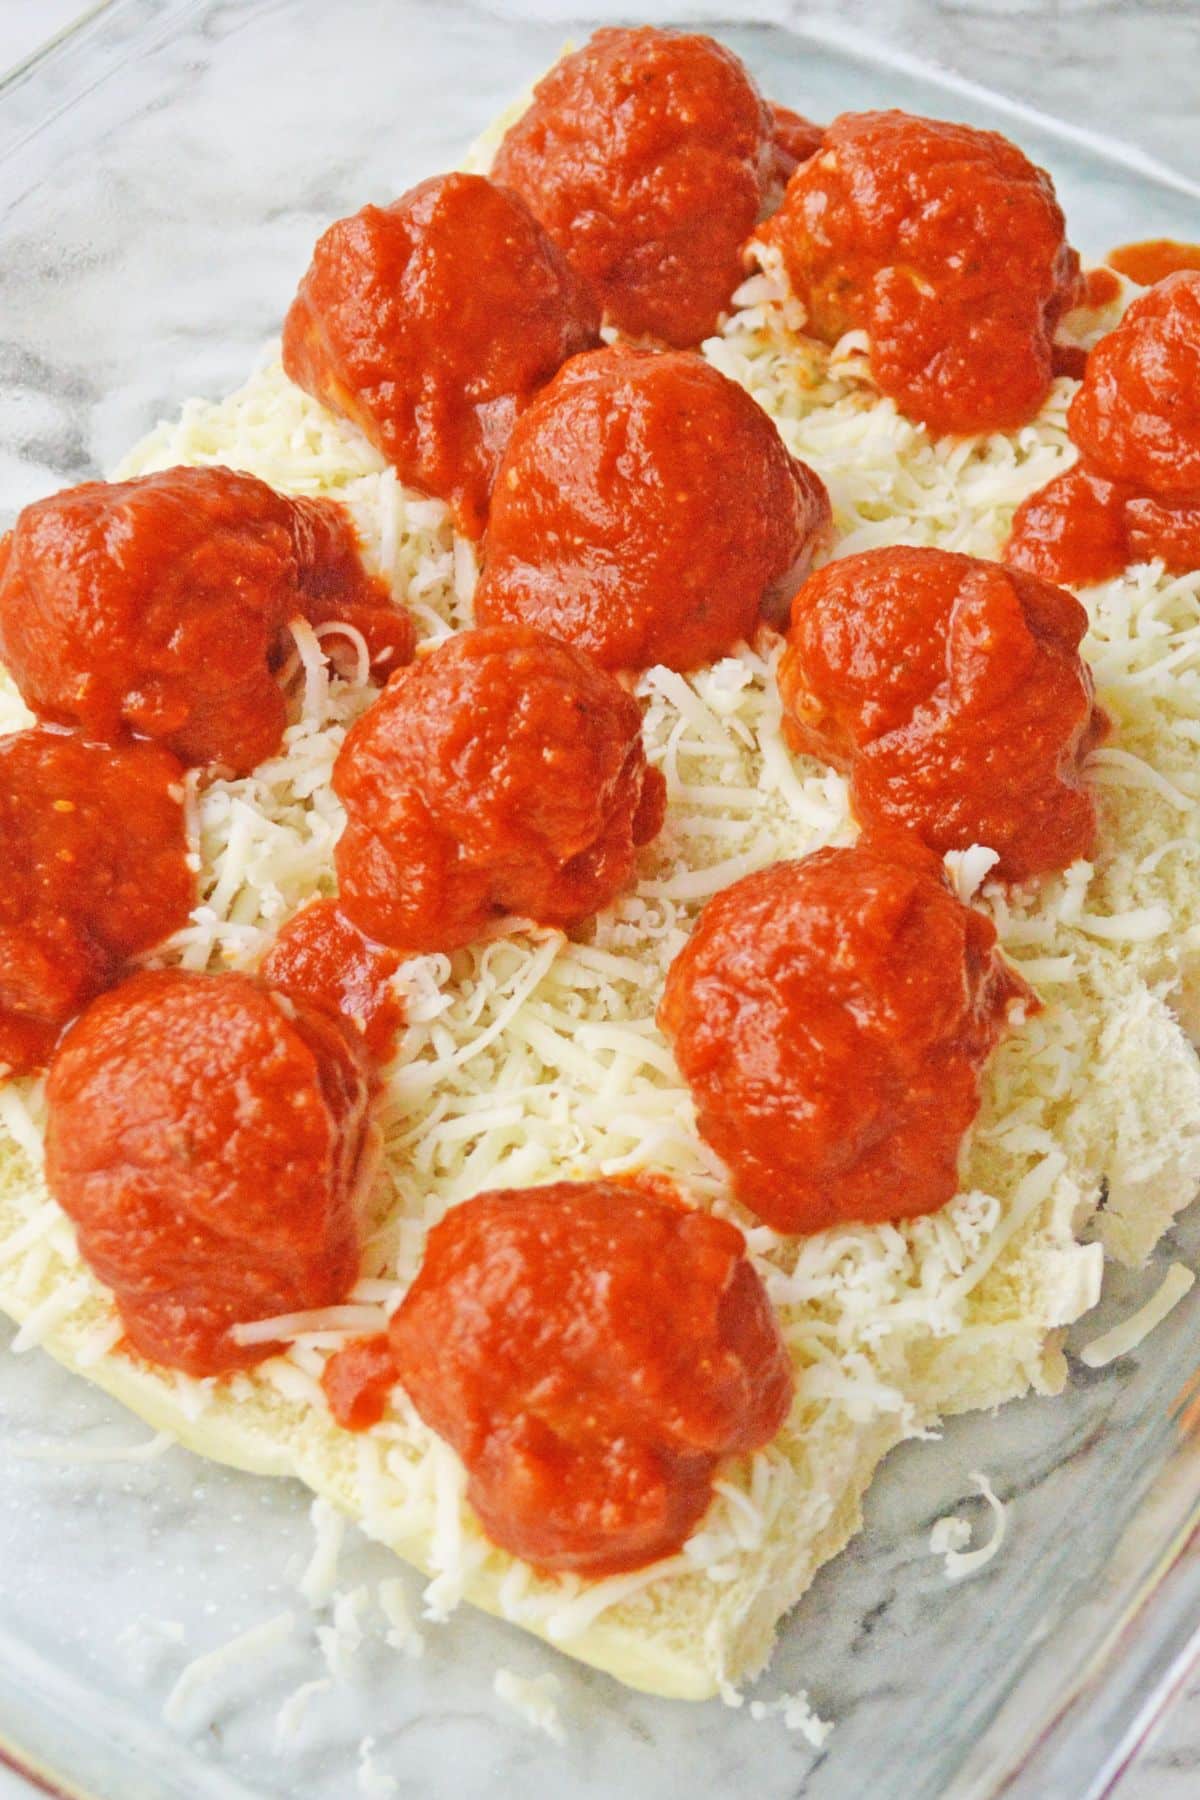 meatballs with sauce on cheese and bread